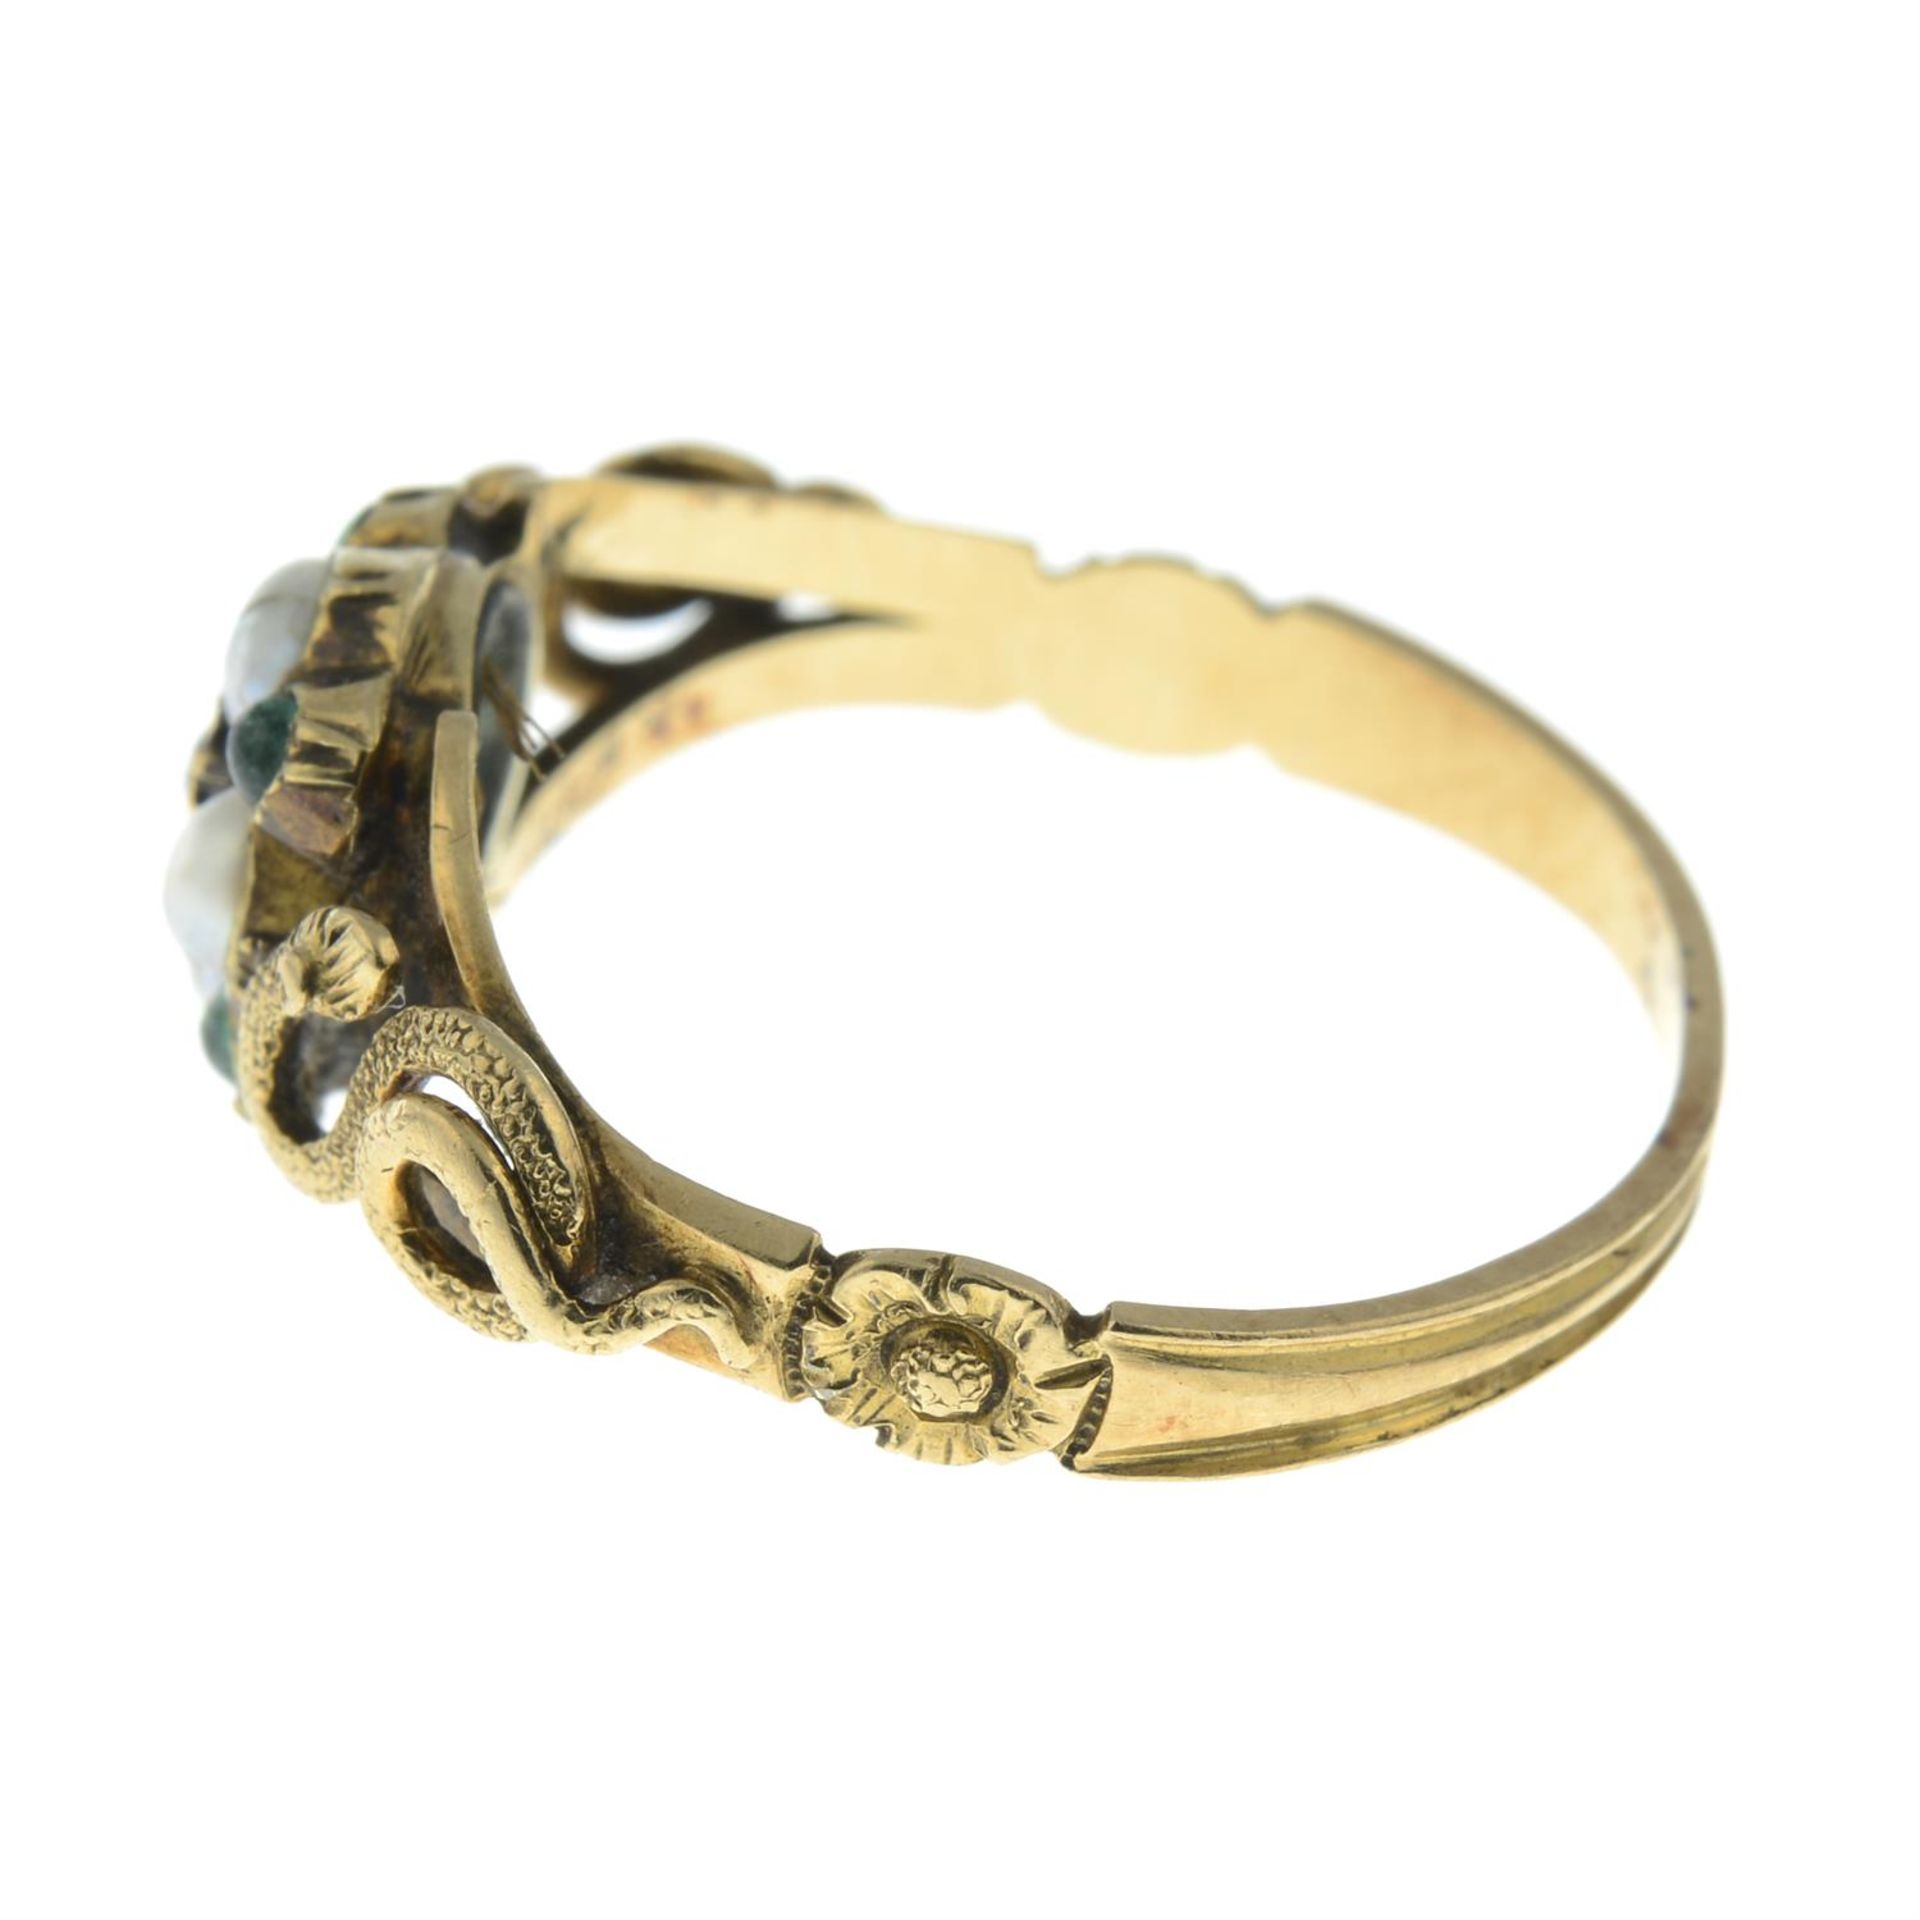 An early to mid 19th century gold emerald and split pearl mourning ring, with snake shoulders. - Image 3 of 5